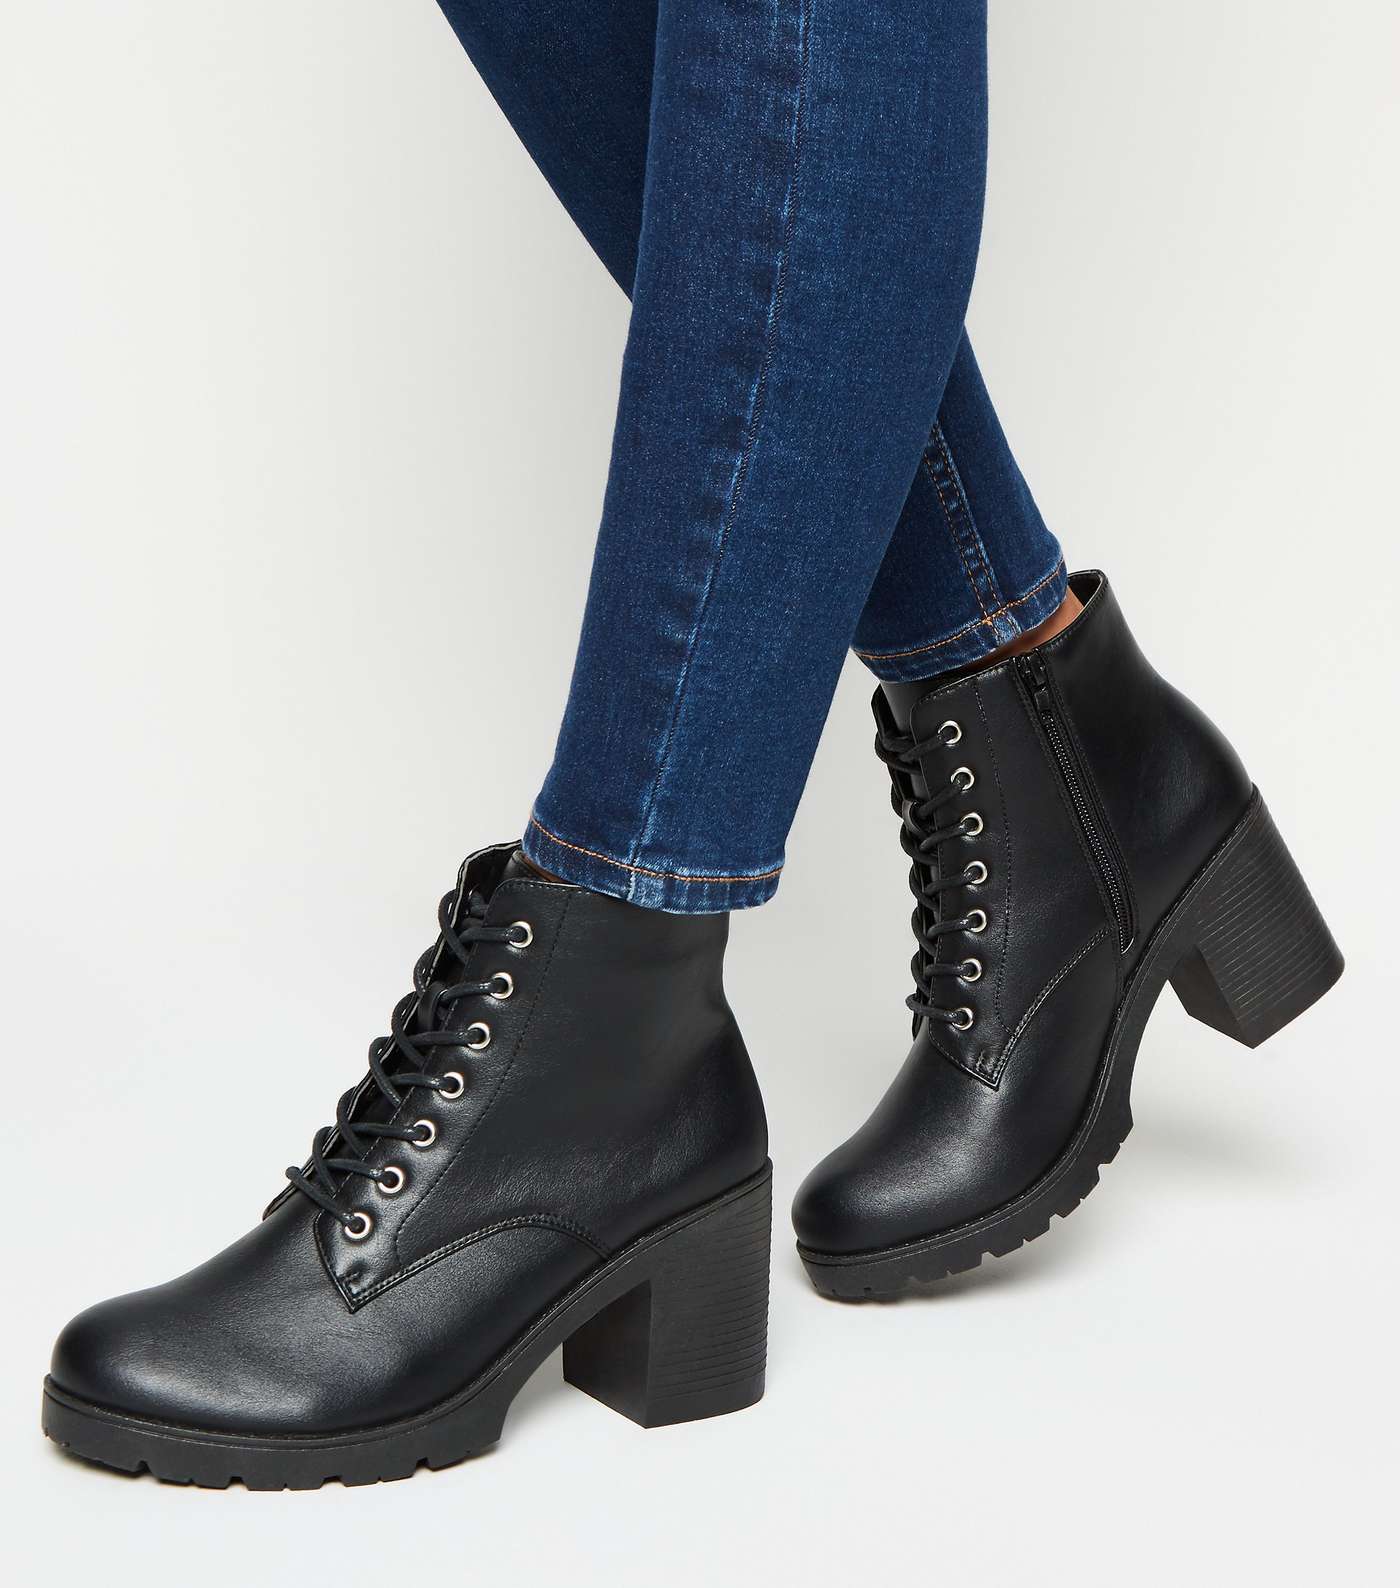 Black Leather-Look Lace Up Heeled Boots Image 2